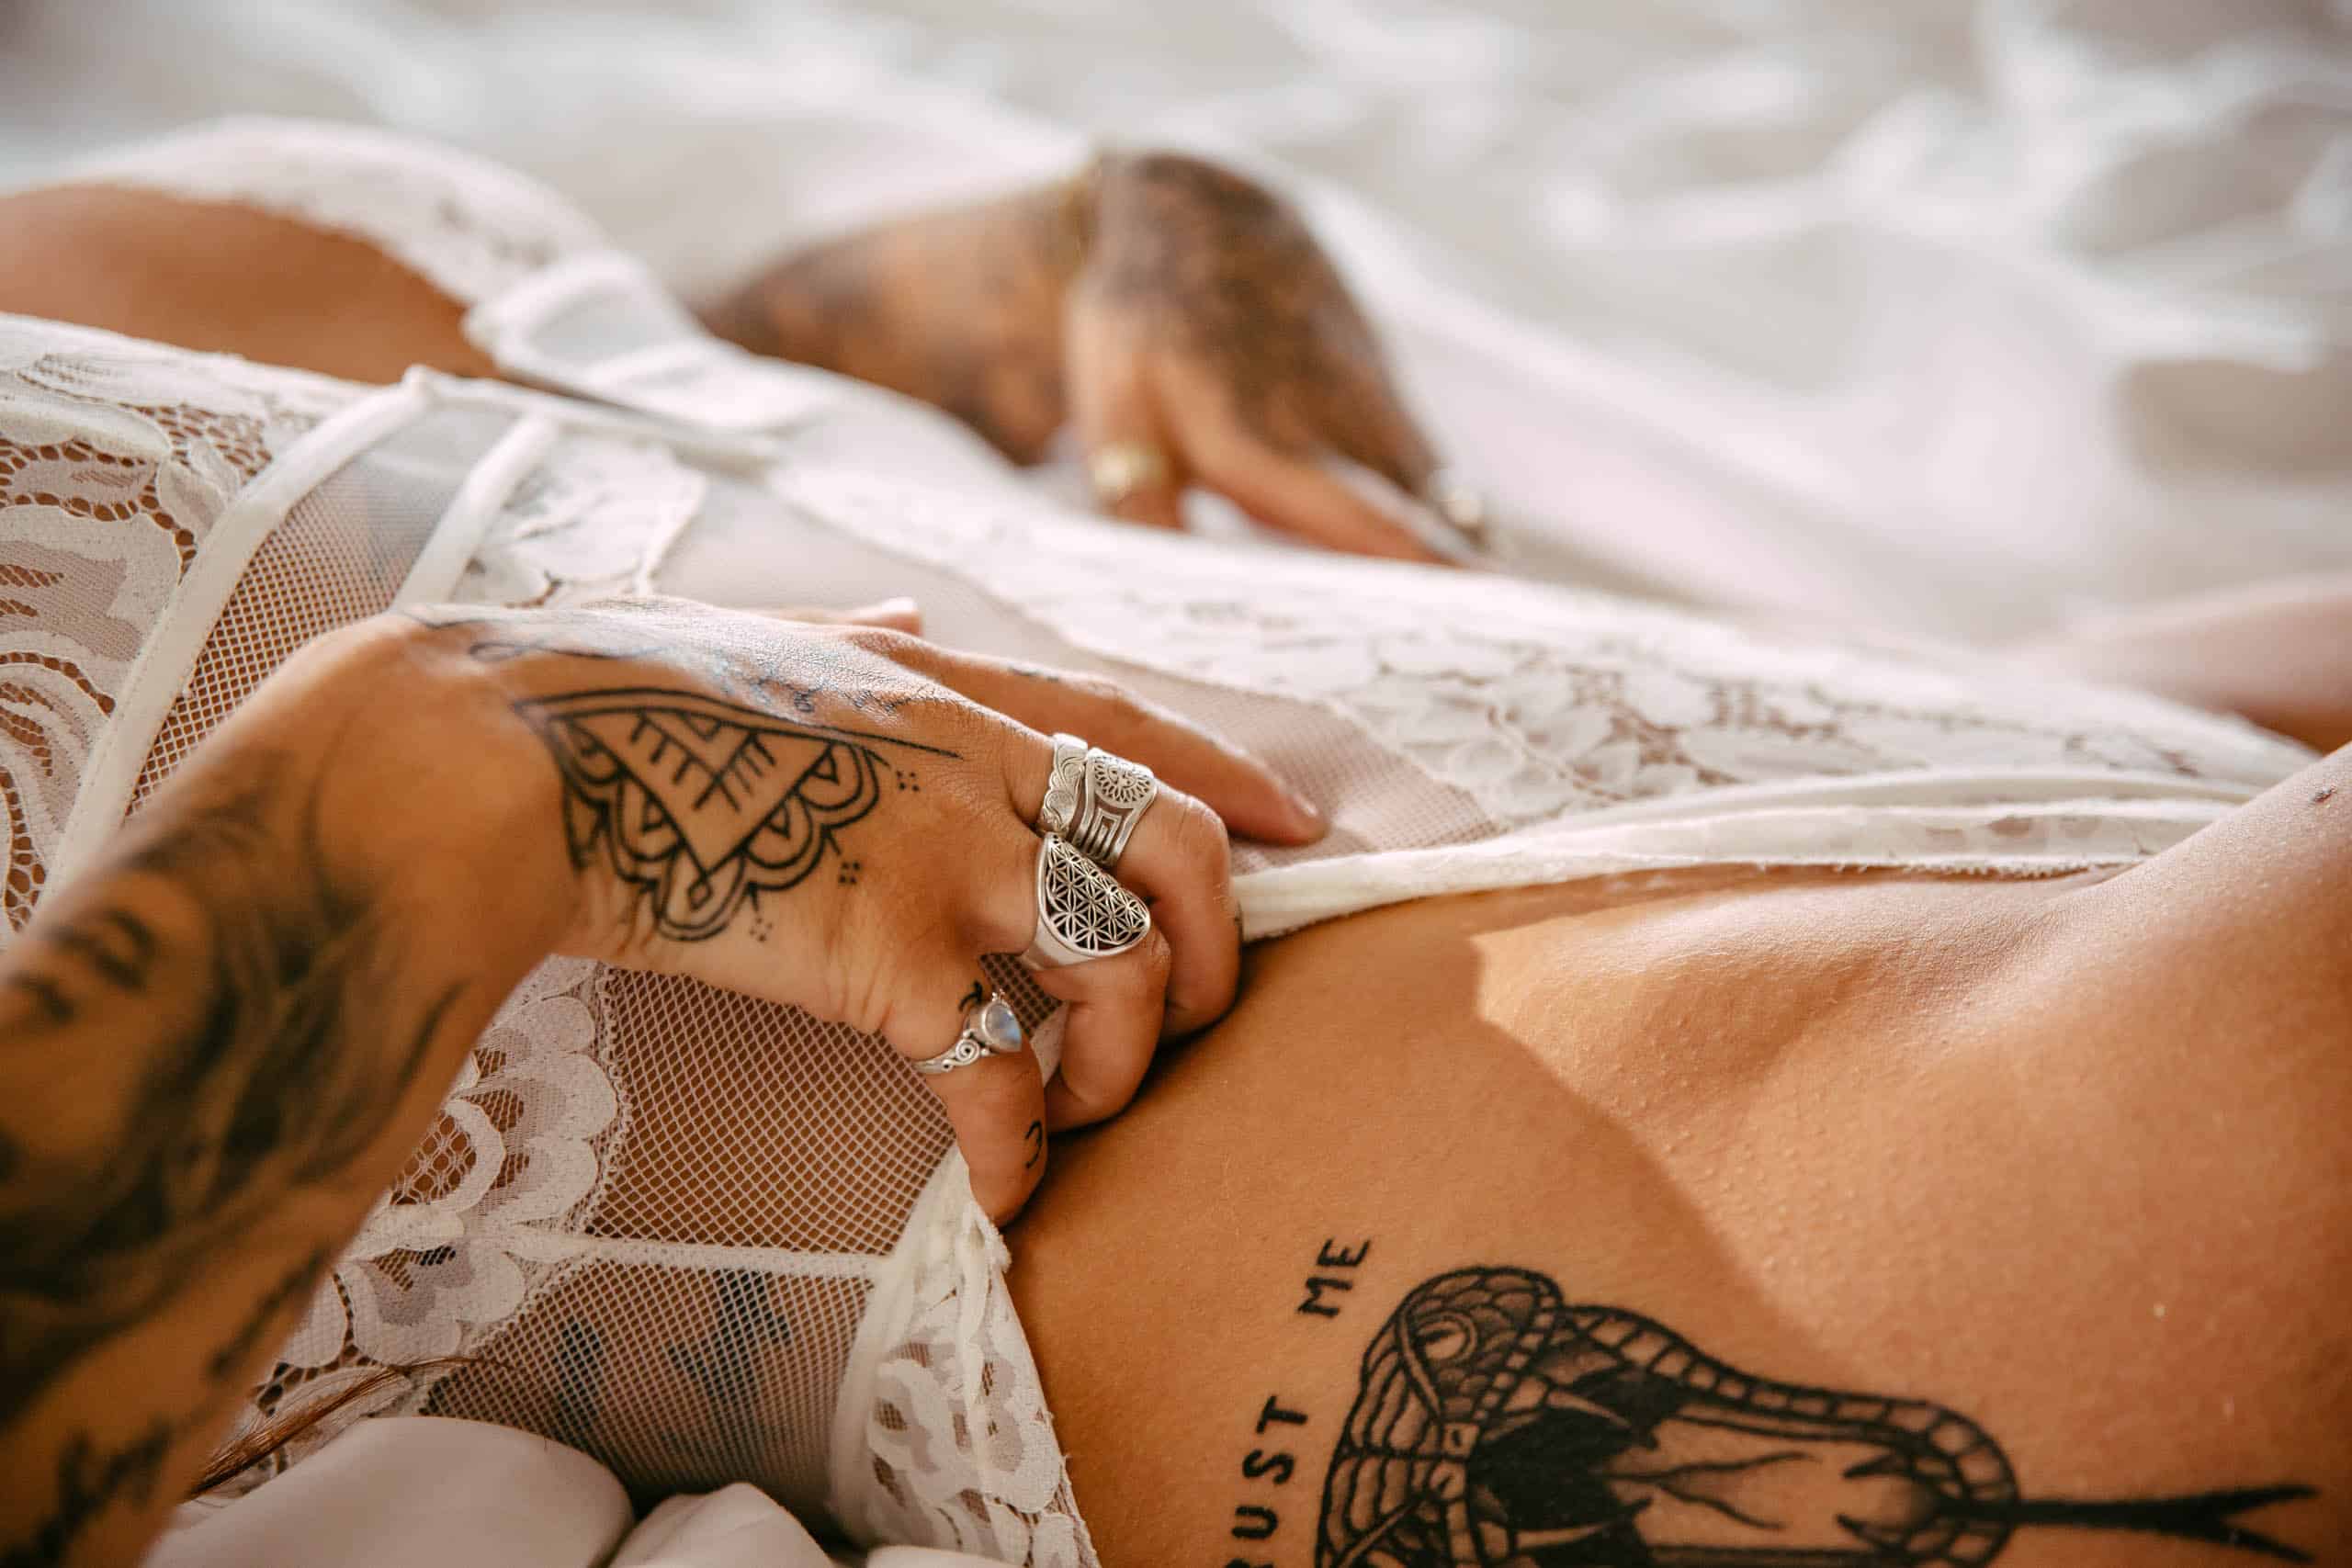 A woman with tattoos poses for a boudoir shoot on a bed in Hoek van Holland.